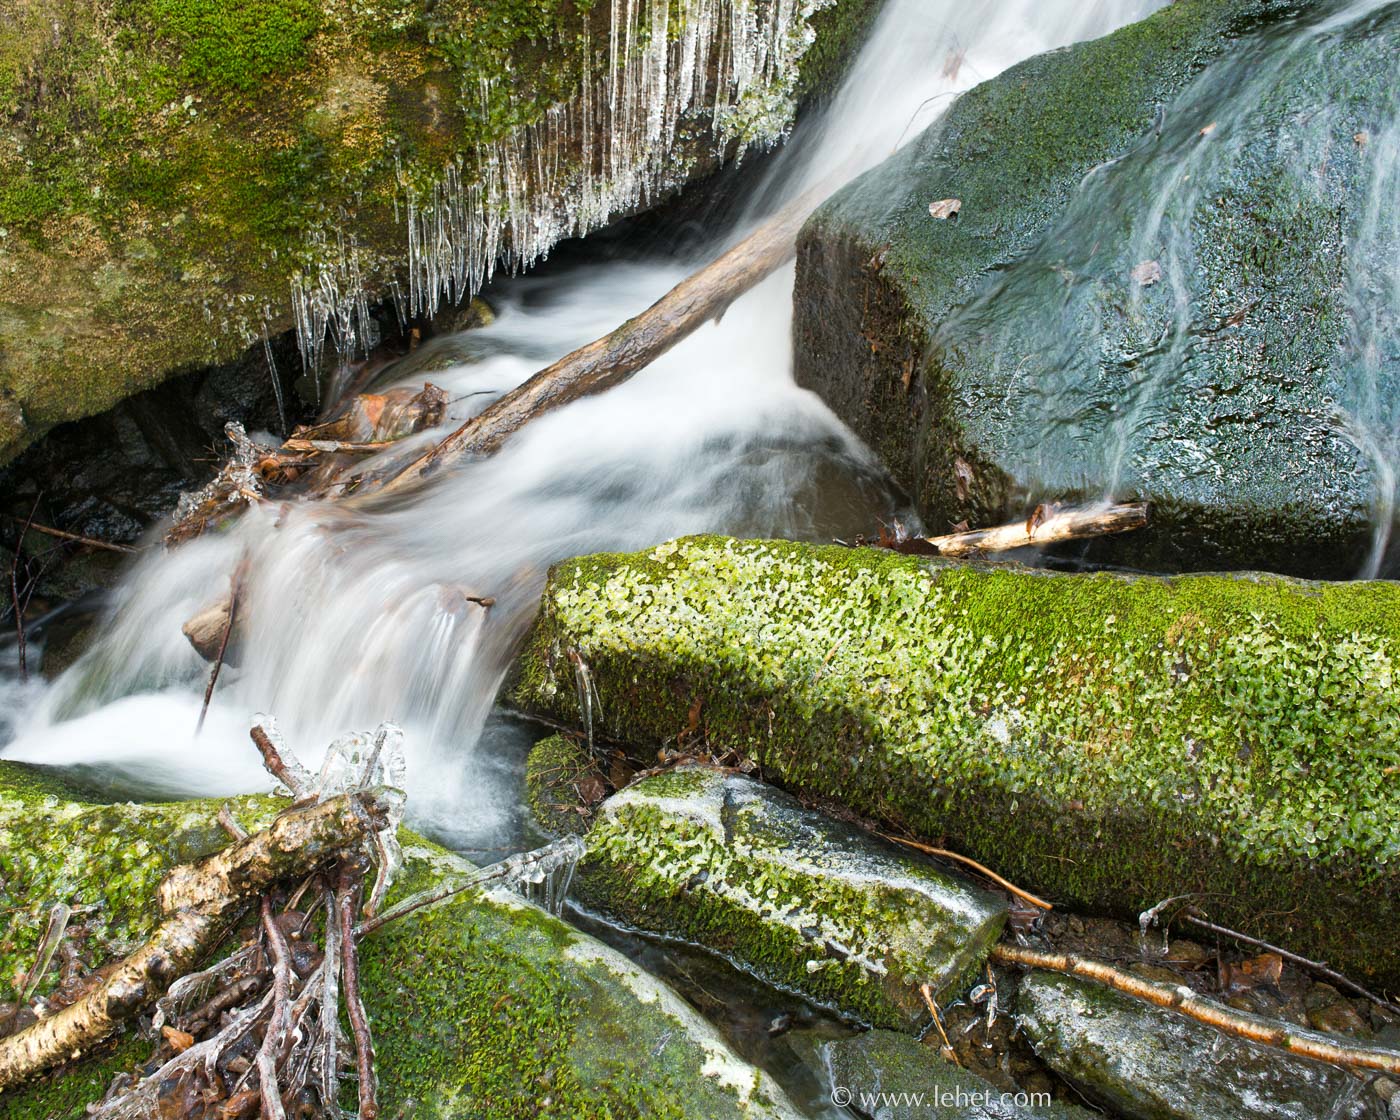 Ice by Mossy Stream, Vermont 2017